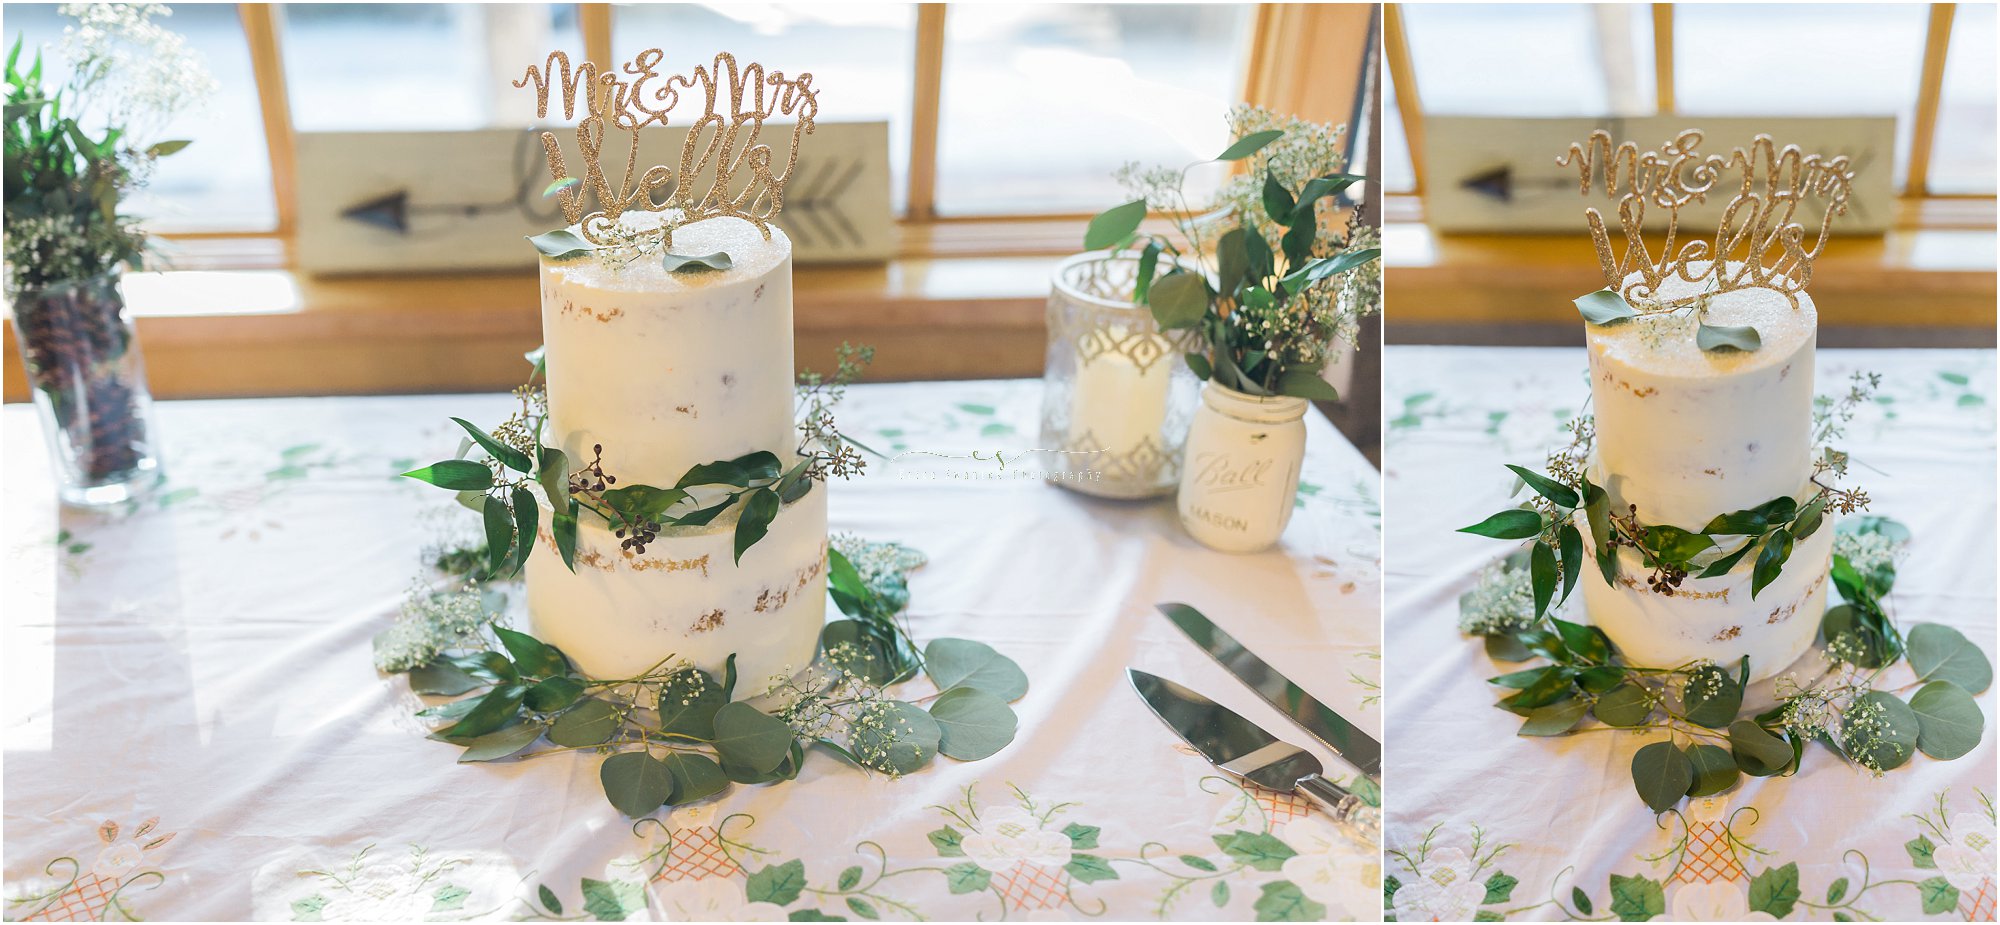 A beautiful Foxtail Bakery cake that really suits the vintage rustic chic Bend wedding theme. | Erica Swantek Photography